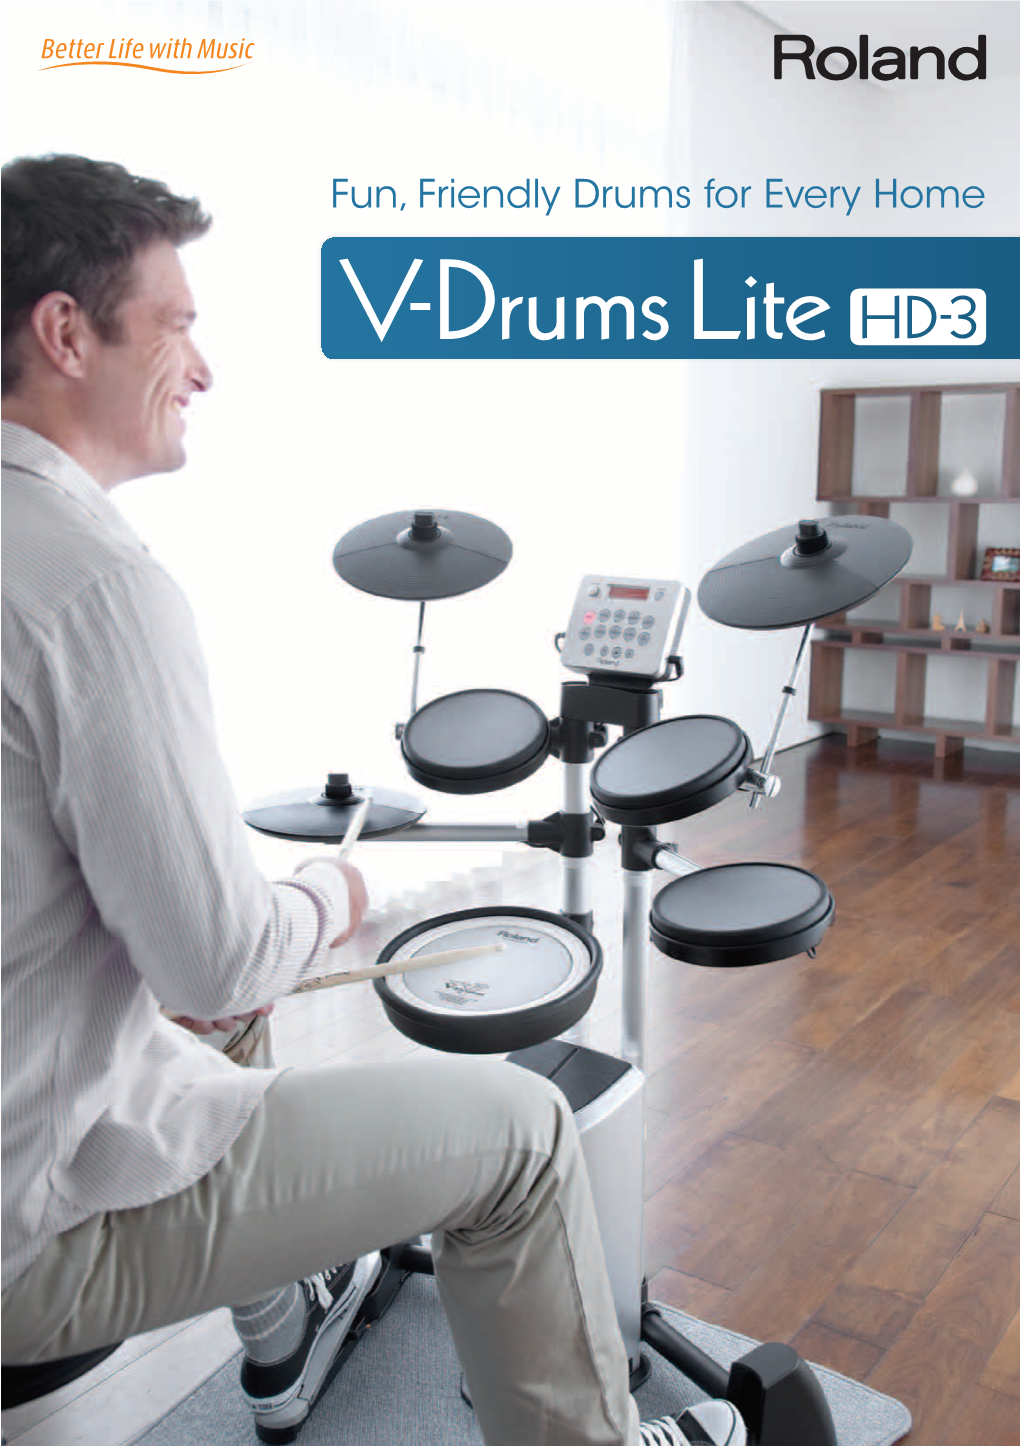 Fun, Friendly Drums for Every Home Roland V-Drums? Visit This Special Website for Exciting Details and Demos of Each Product